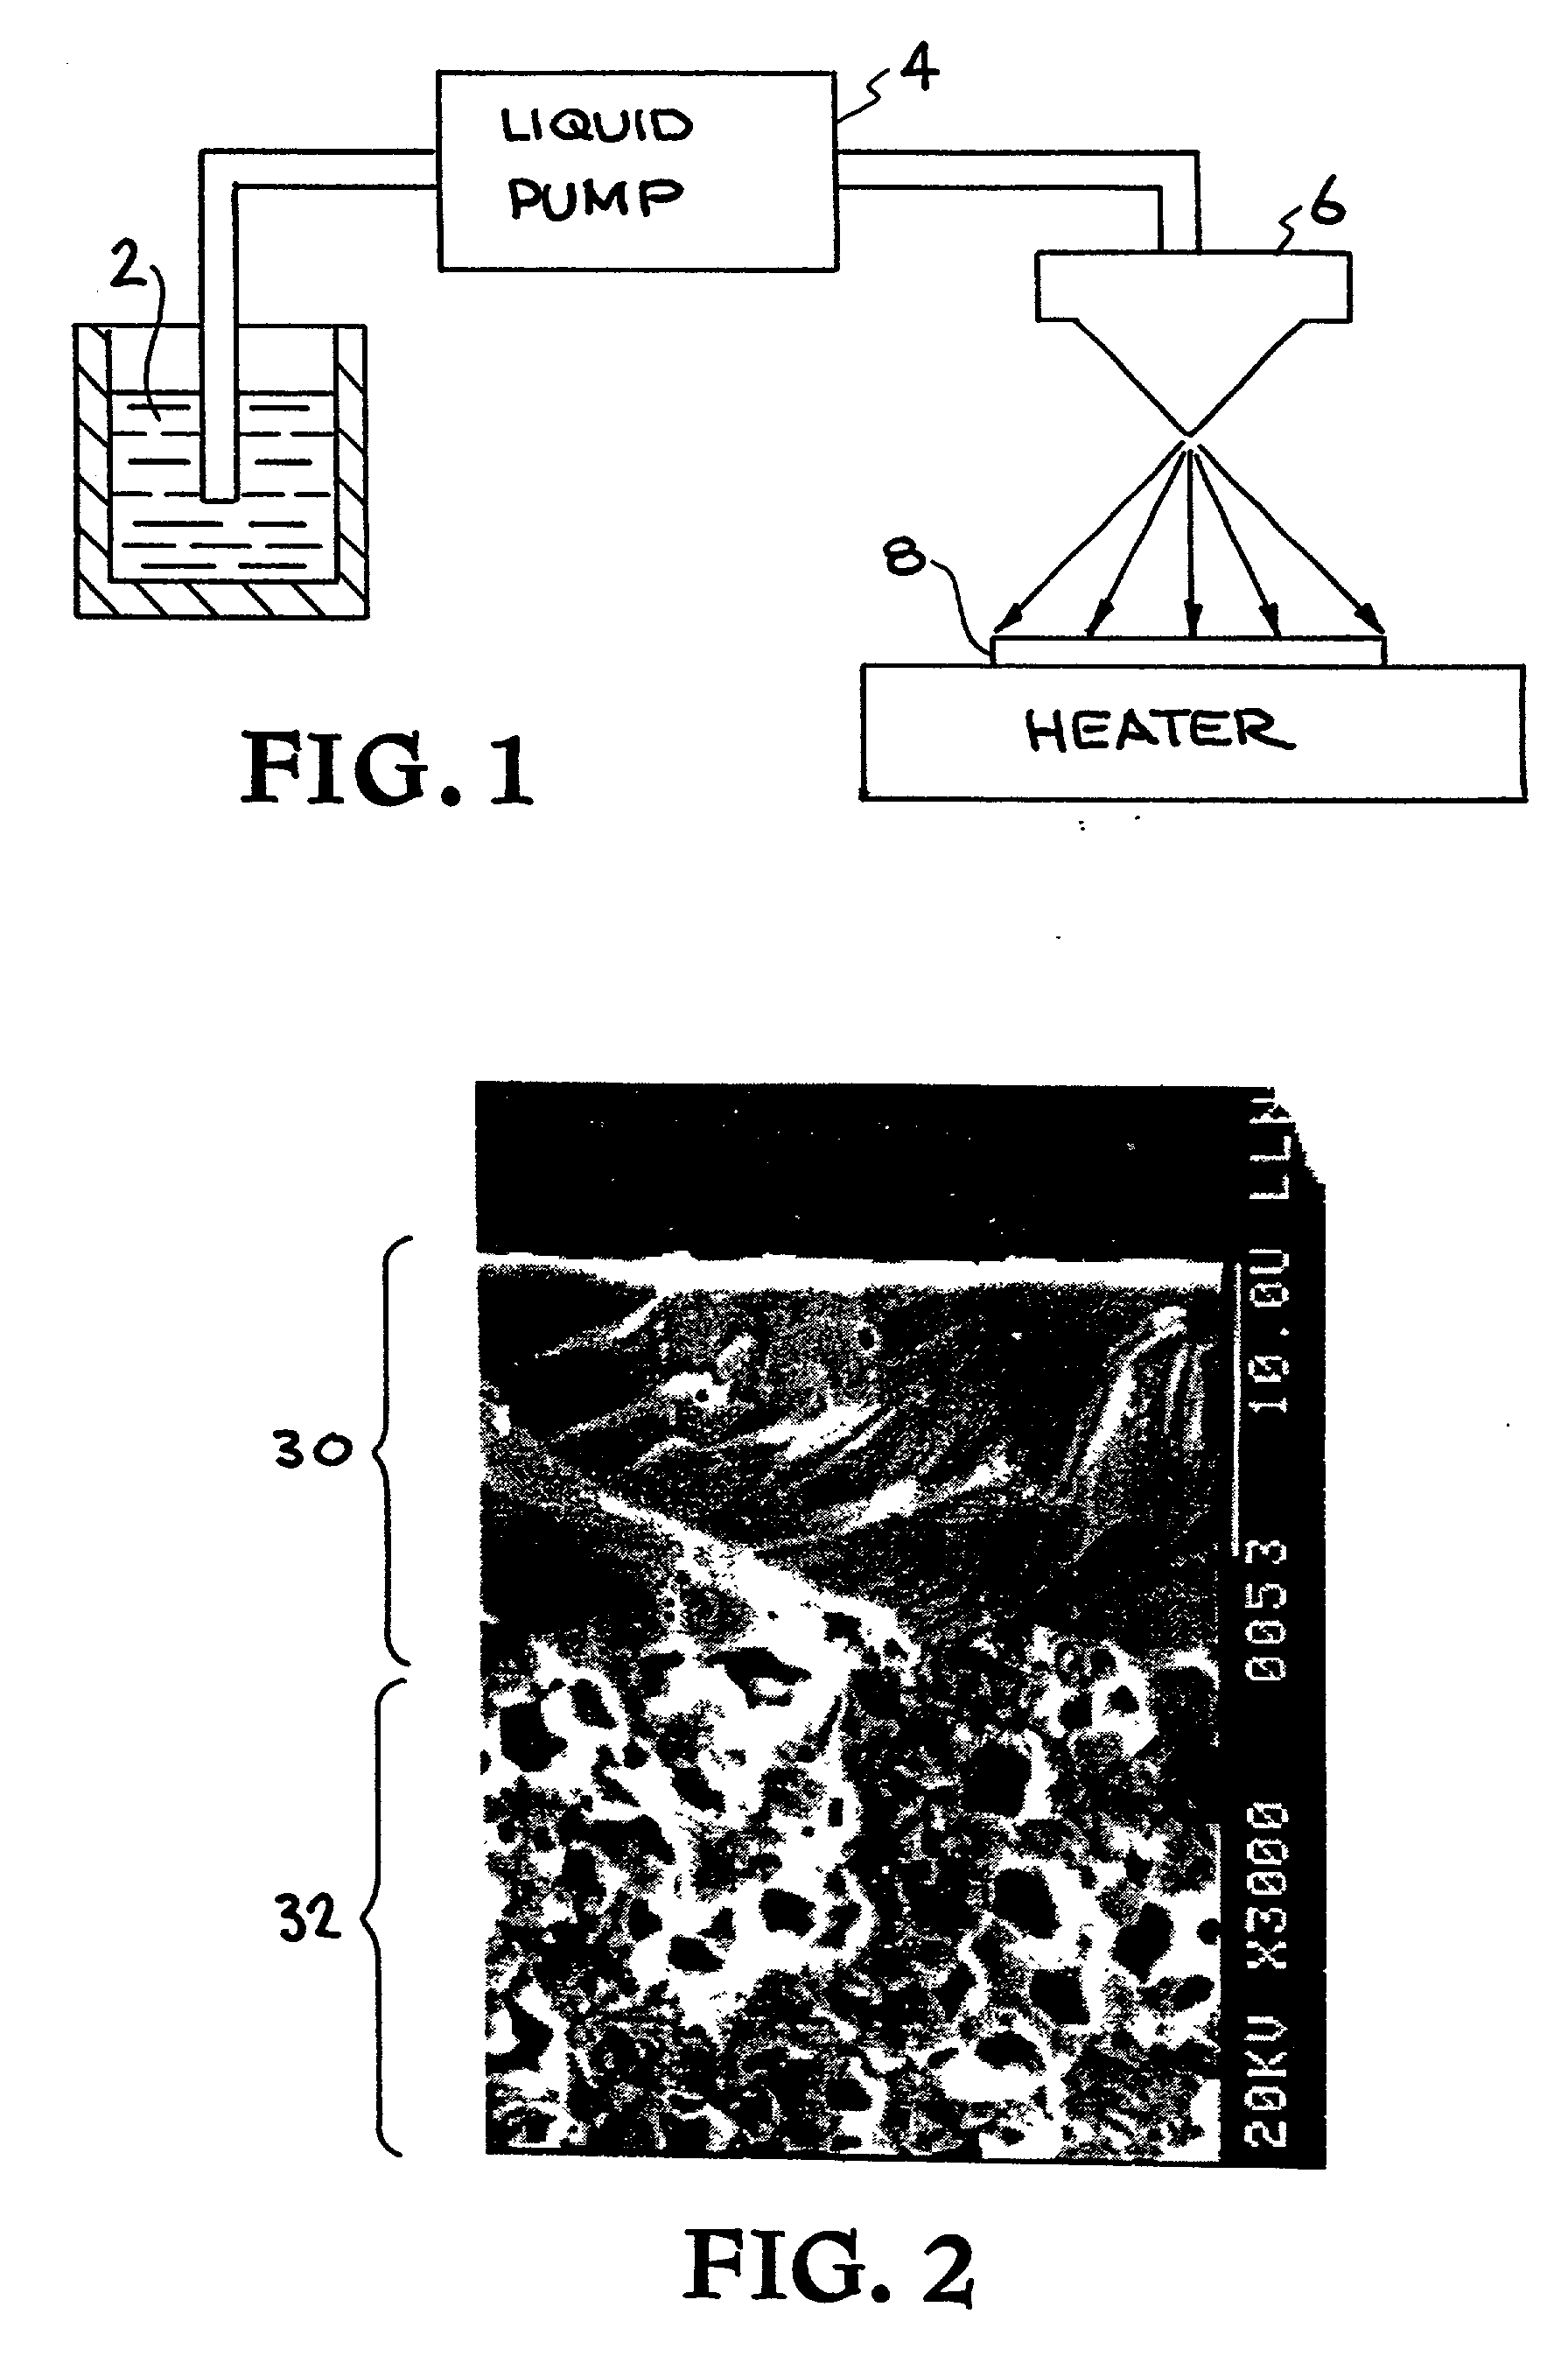 Colloidal spray method for low cost thin coating deposition